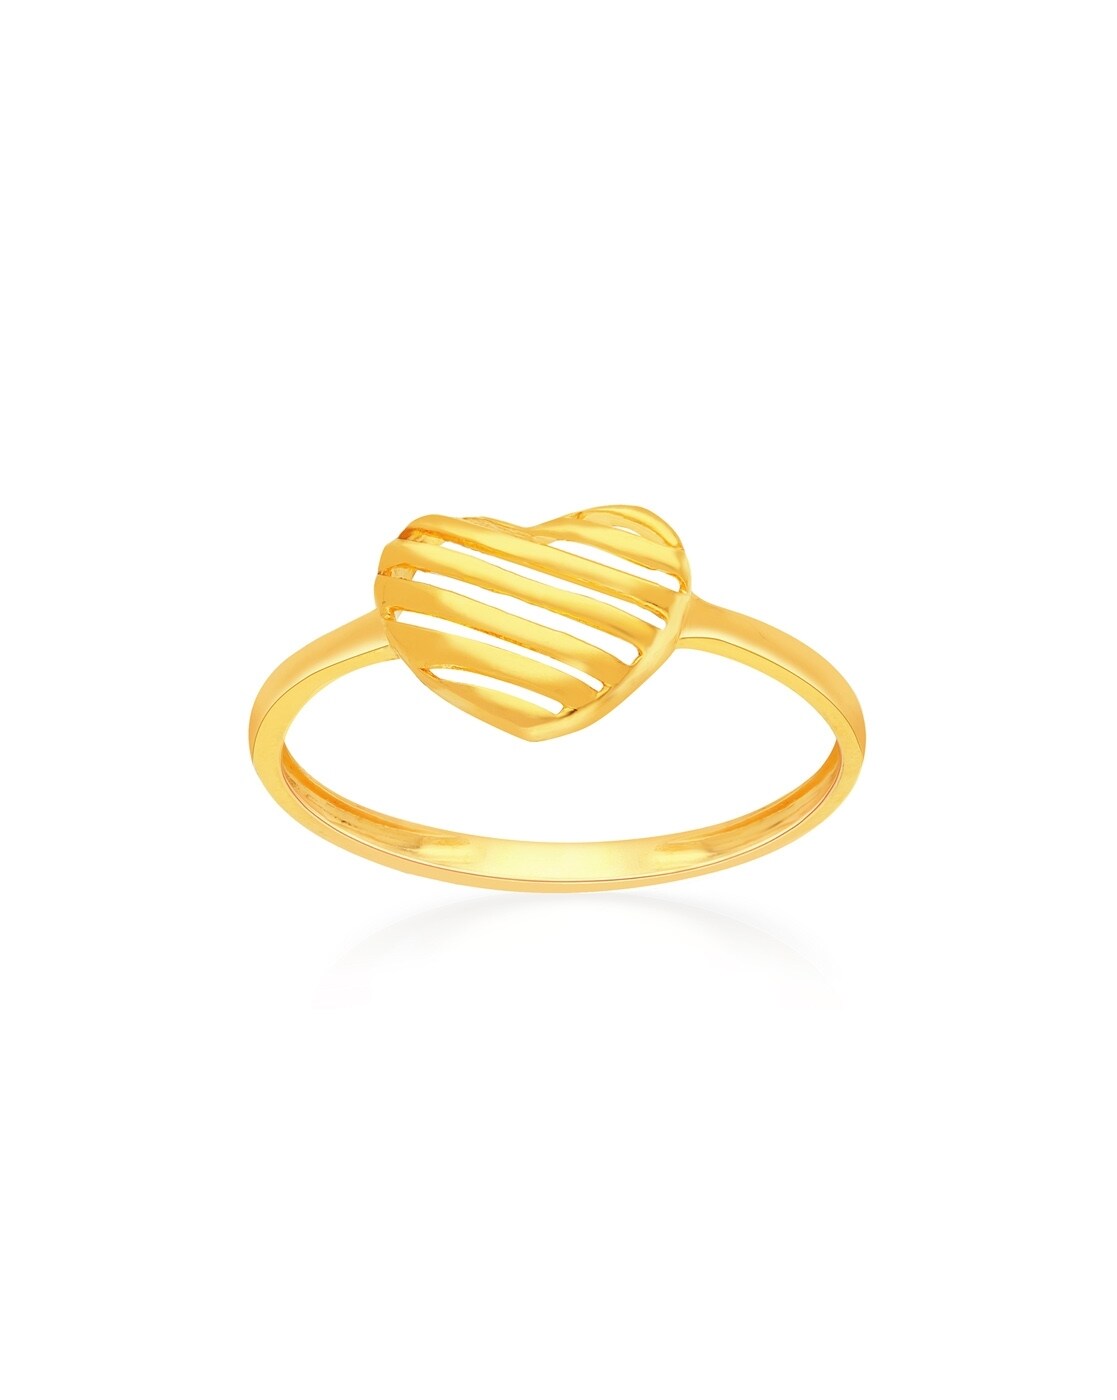 Buy Yellow Gold Rings for Women by Malabar Gold & Diamonds Online